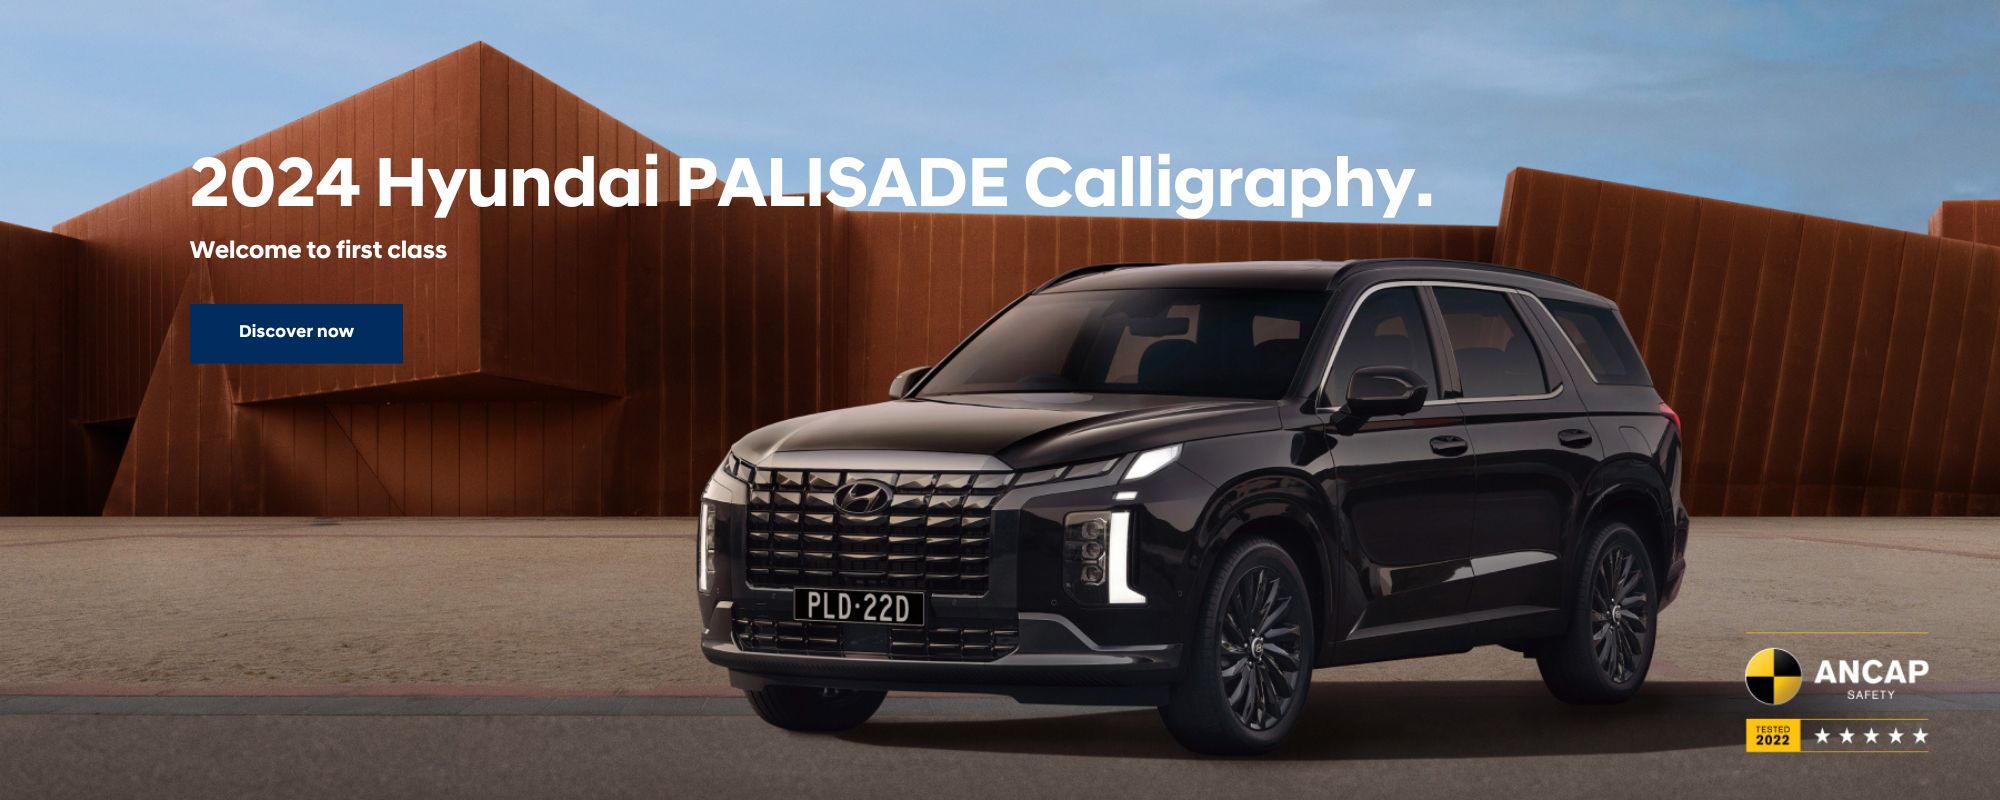 2024 Hyundai PALISADE Calligraphy. Welcome to first class